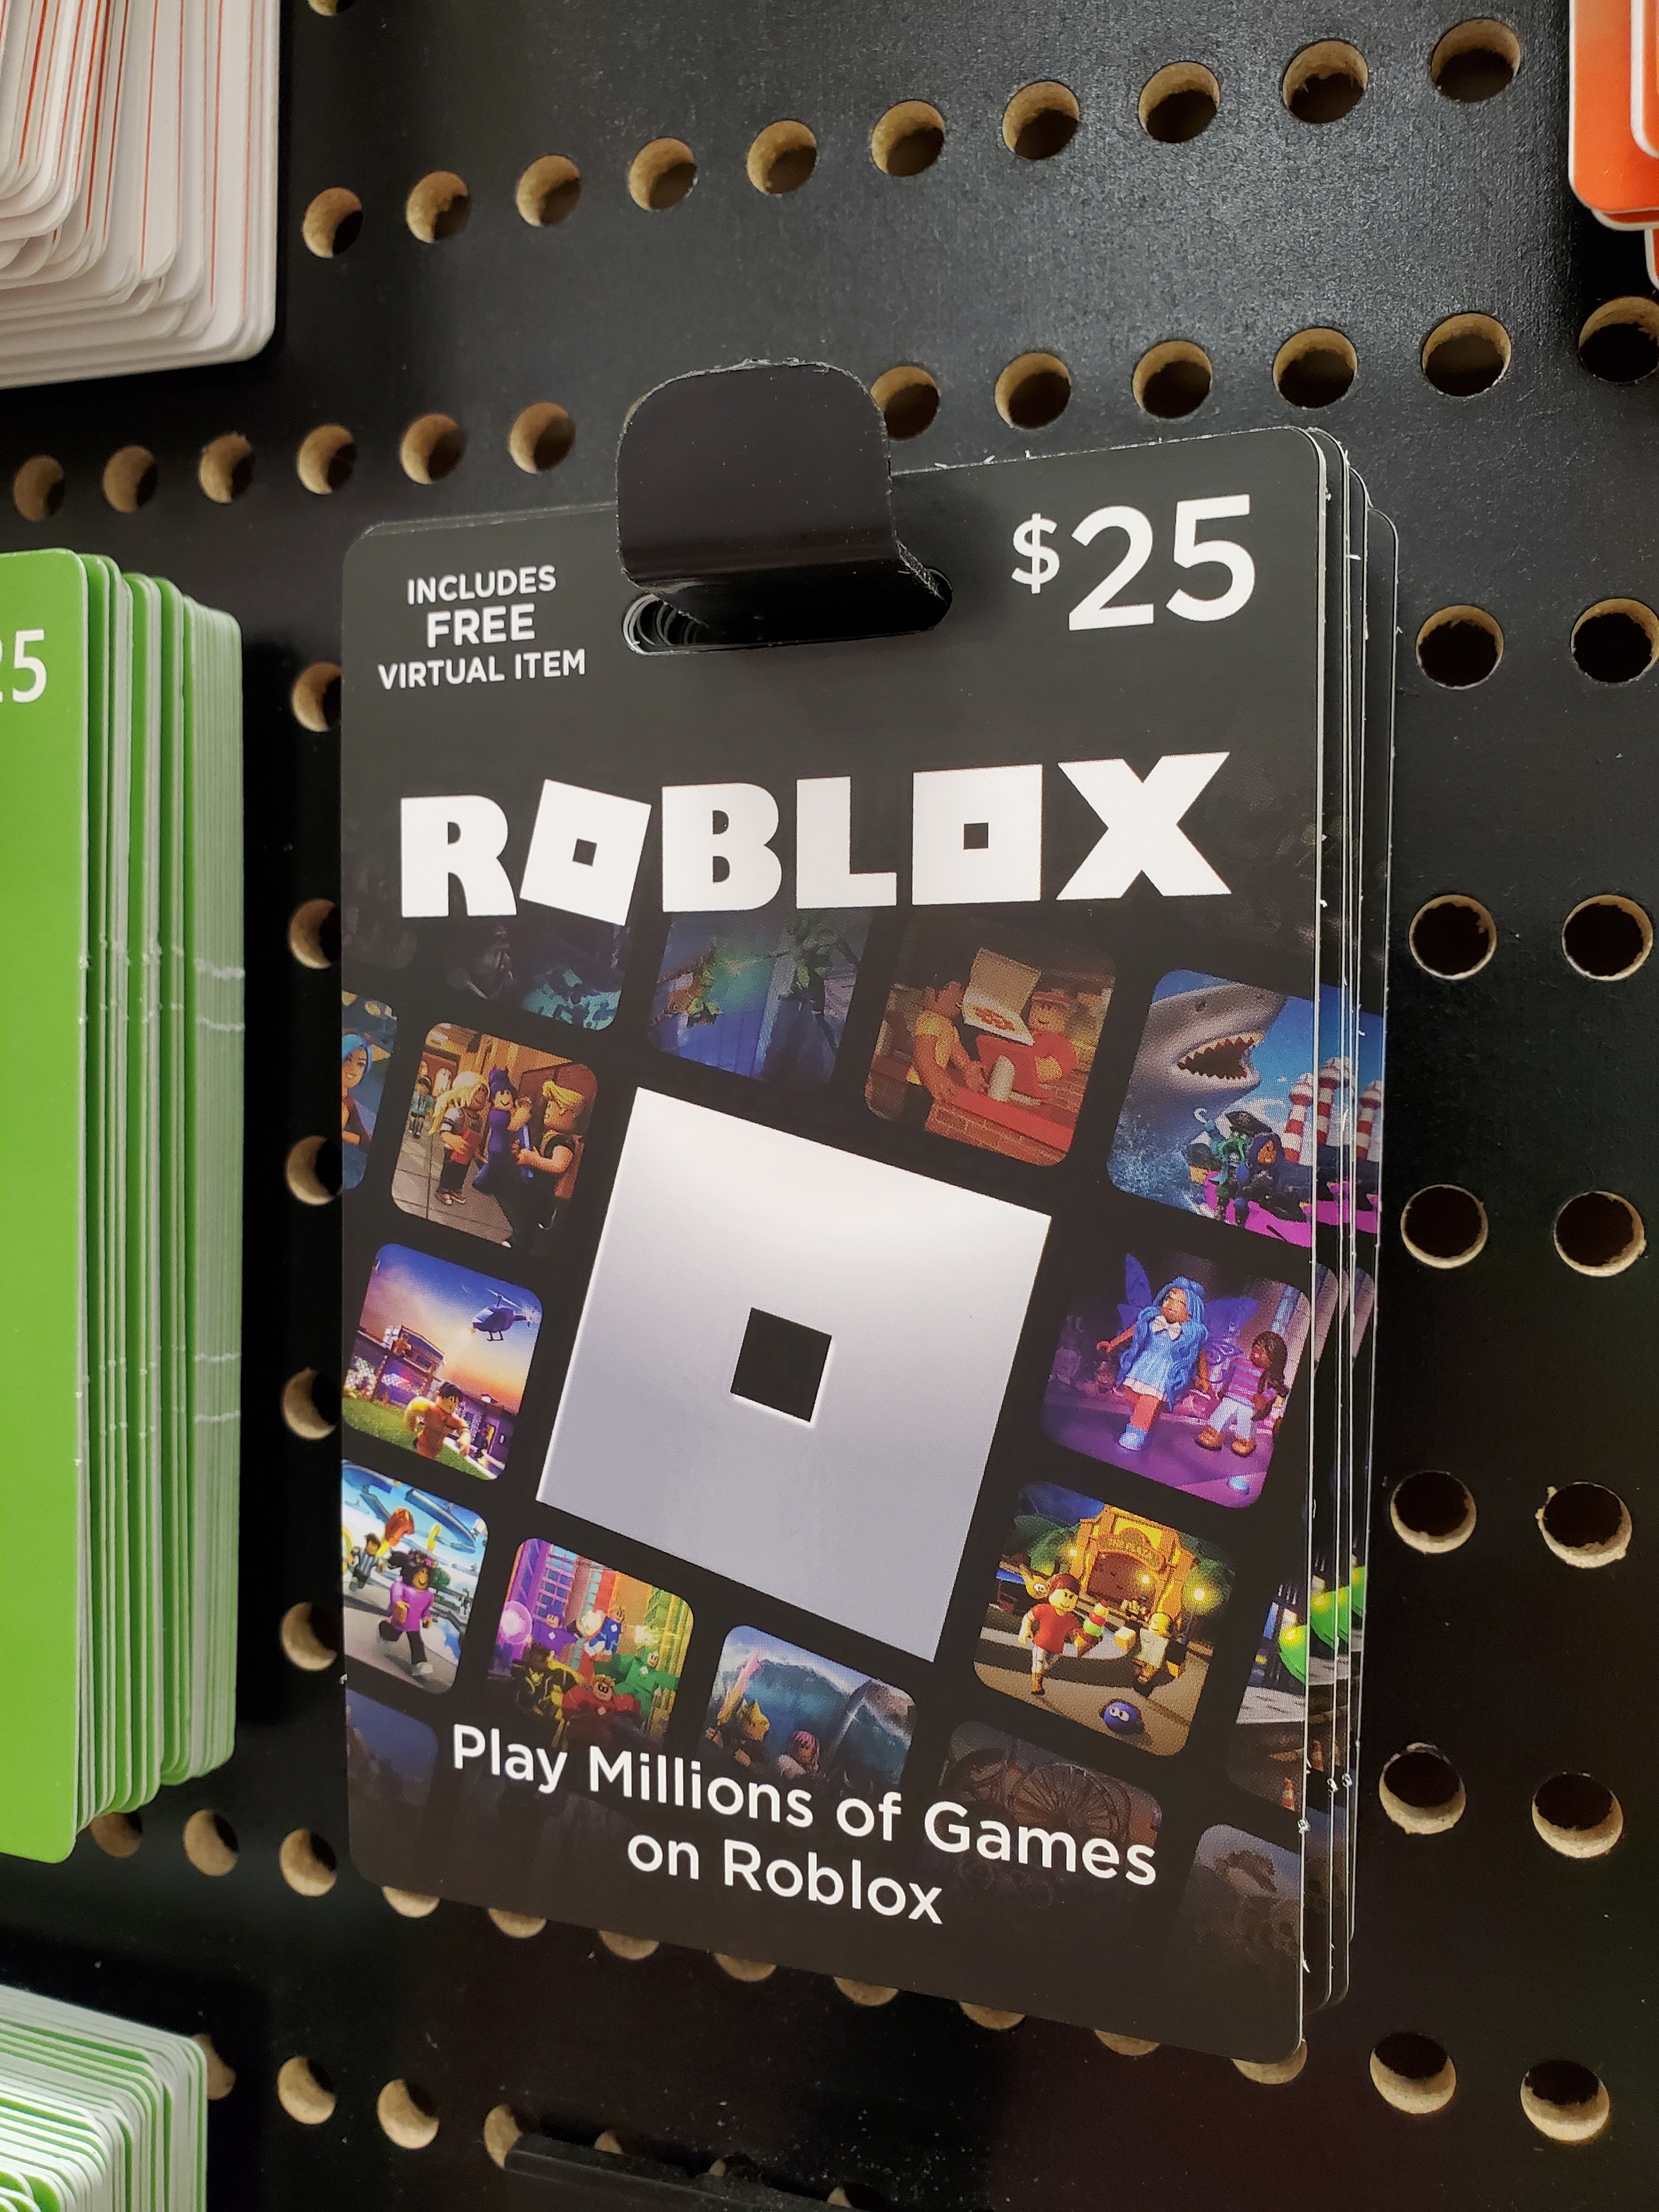 How Much Robux is 25 Dollars? - Nairobi Wire